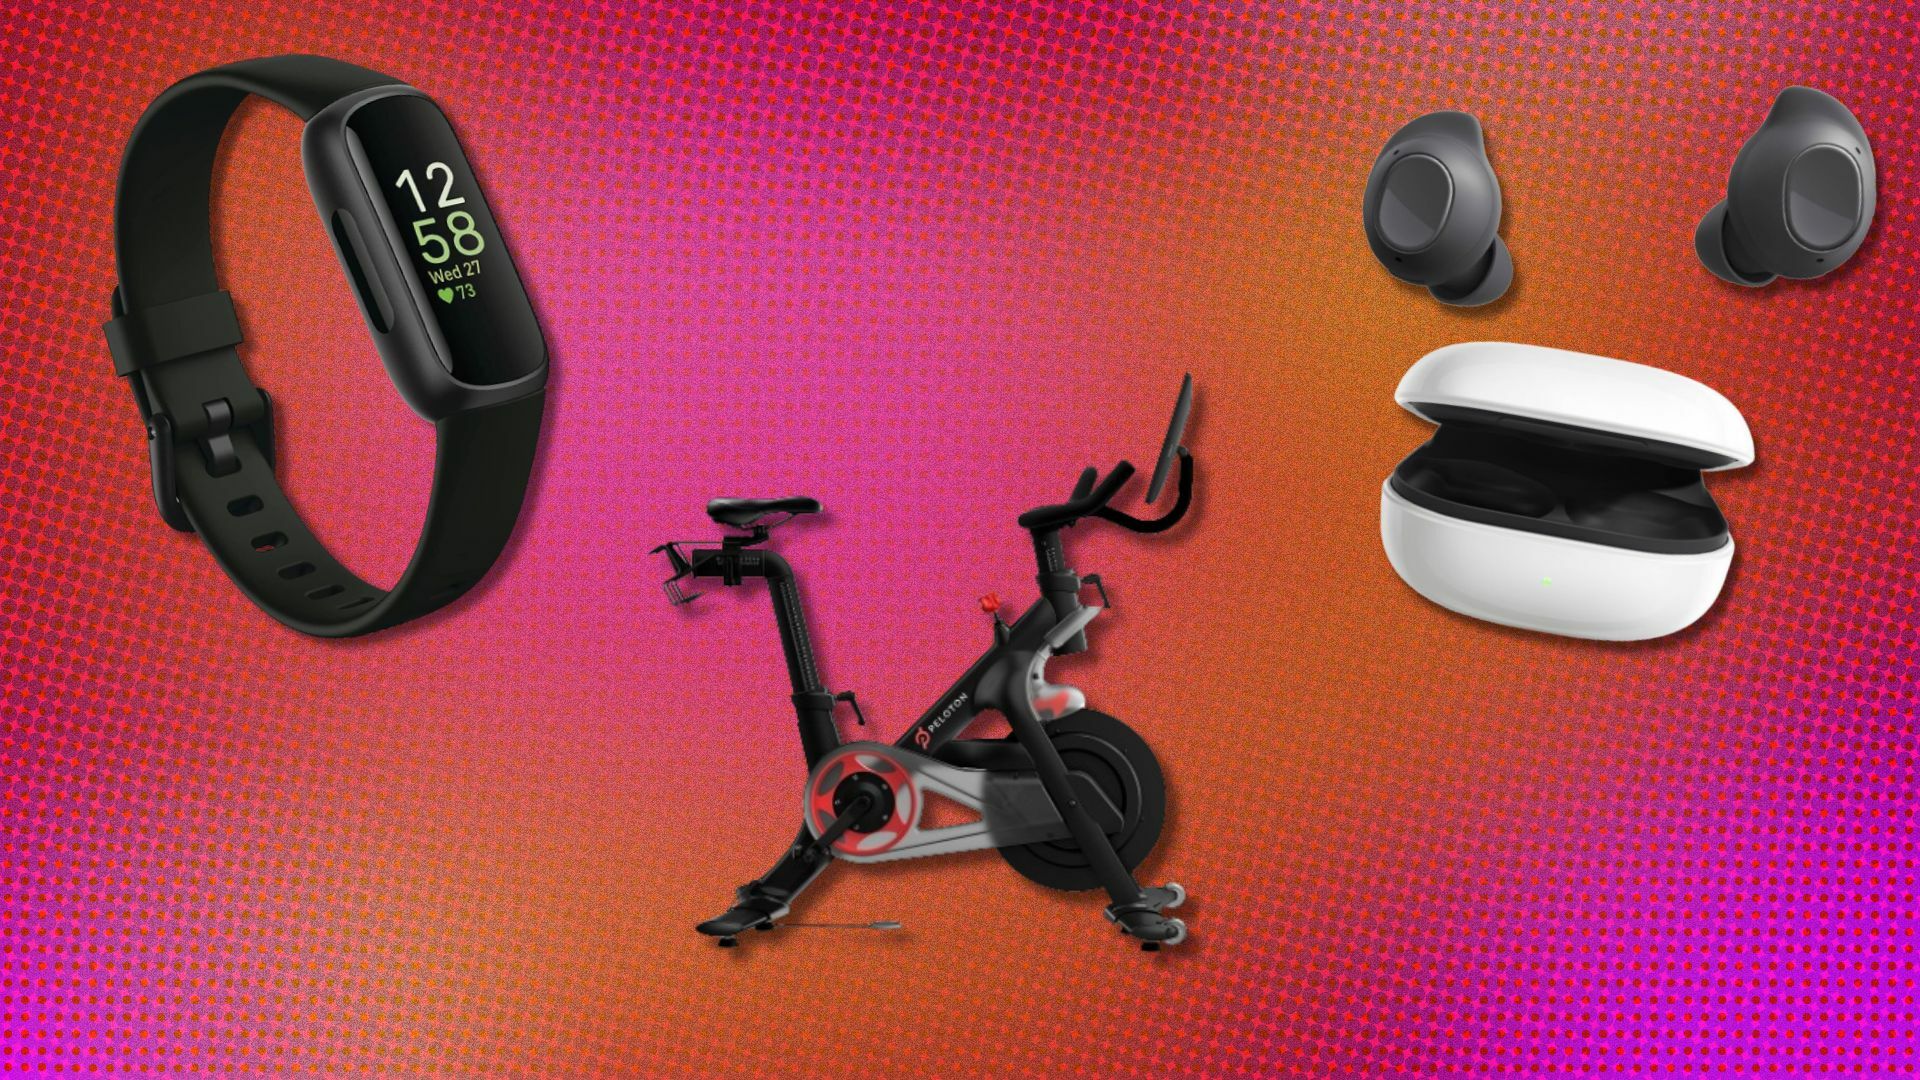 a fitbit watch, peloton bike, and samsung earbuds on a background of pink and orange